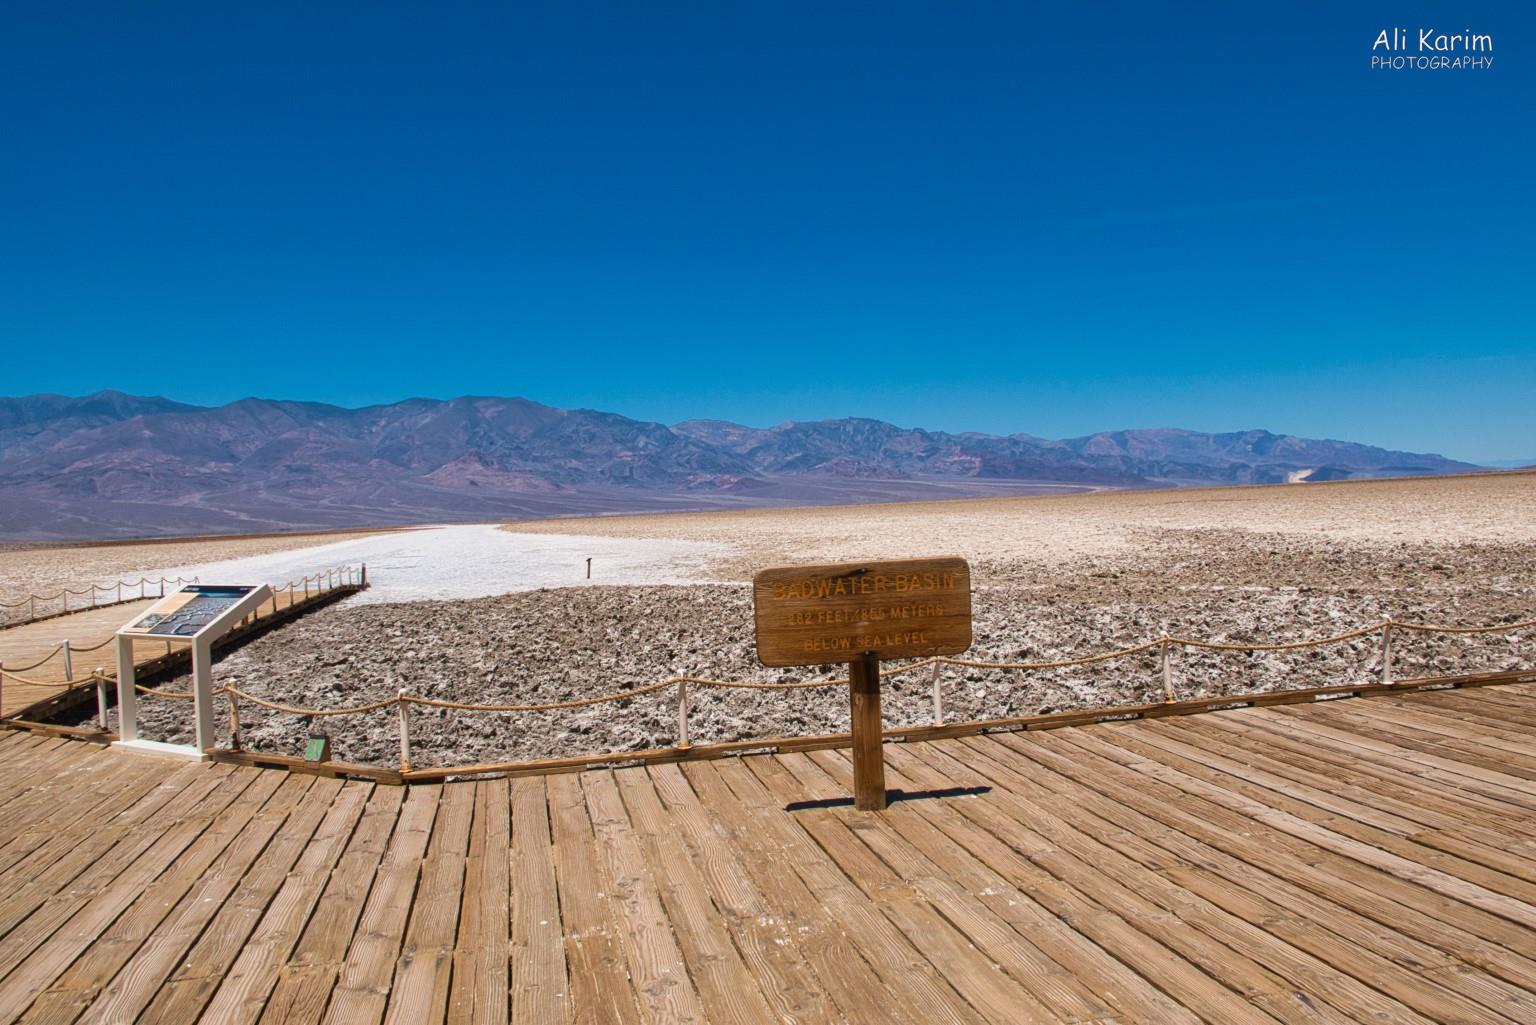 Death Valley National Park, June 2020, So serene and beautiful, but hot